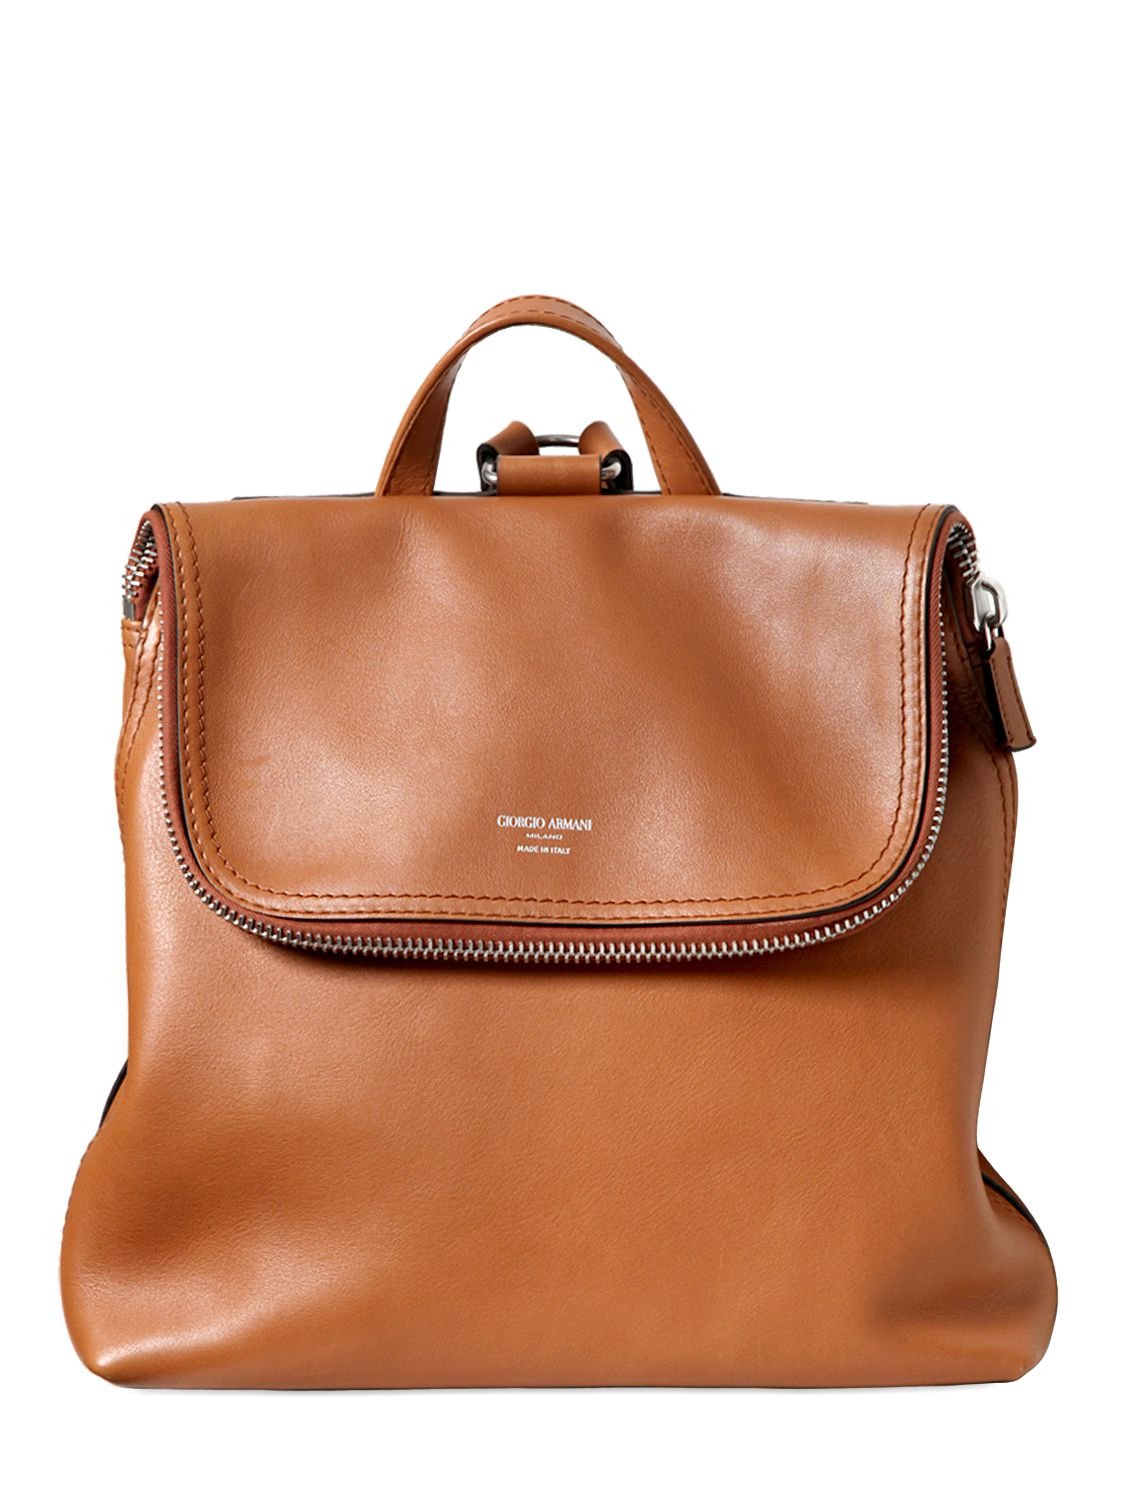 Giorgio Armani Leather Backpack in Brown for Men - Lyst